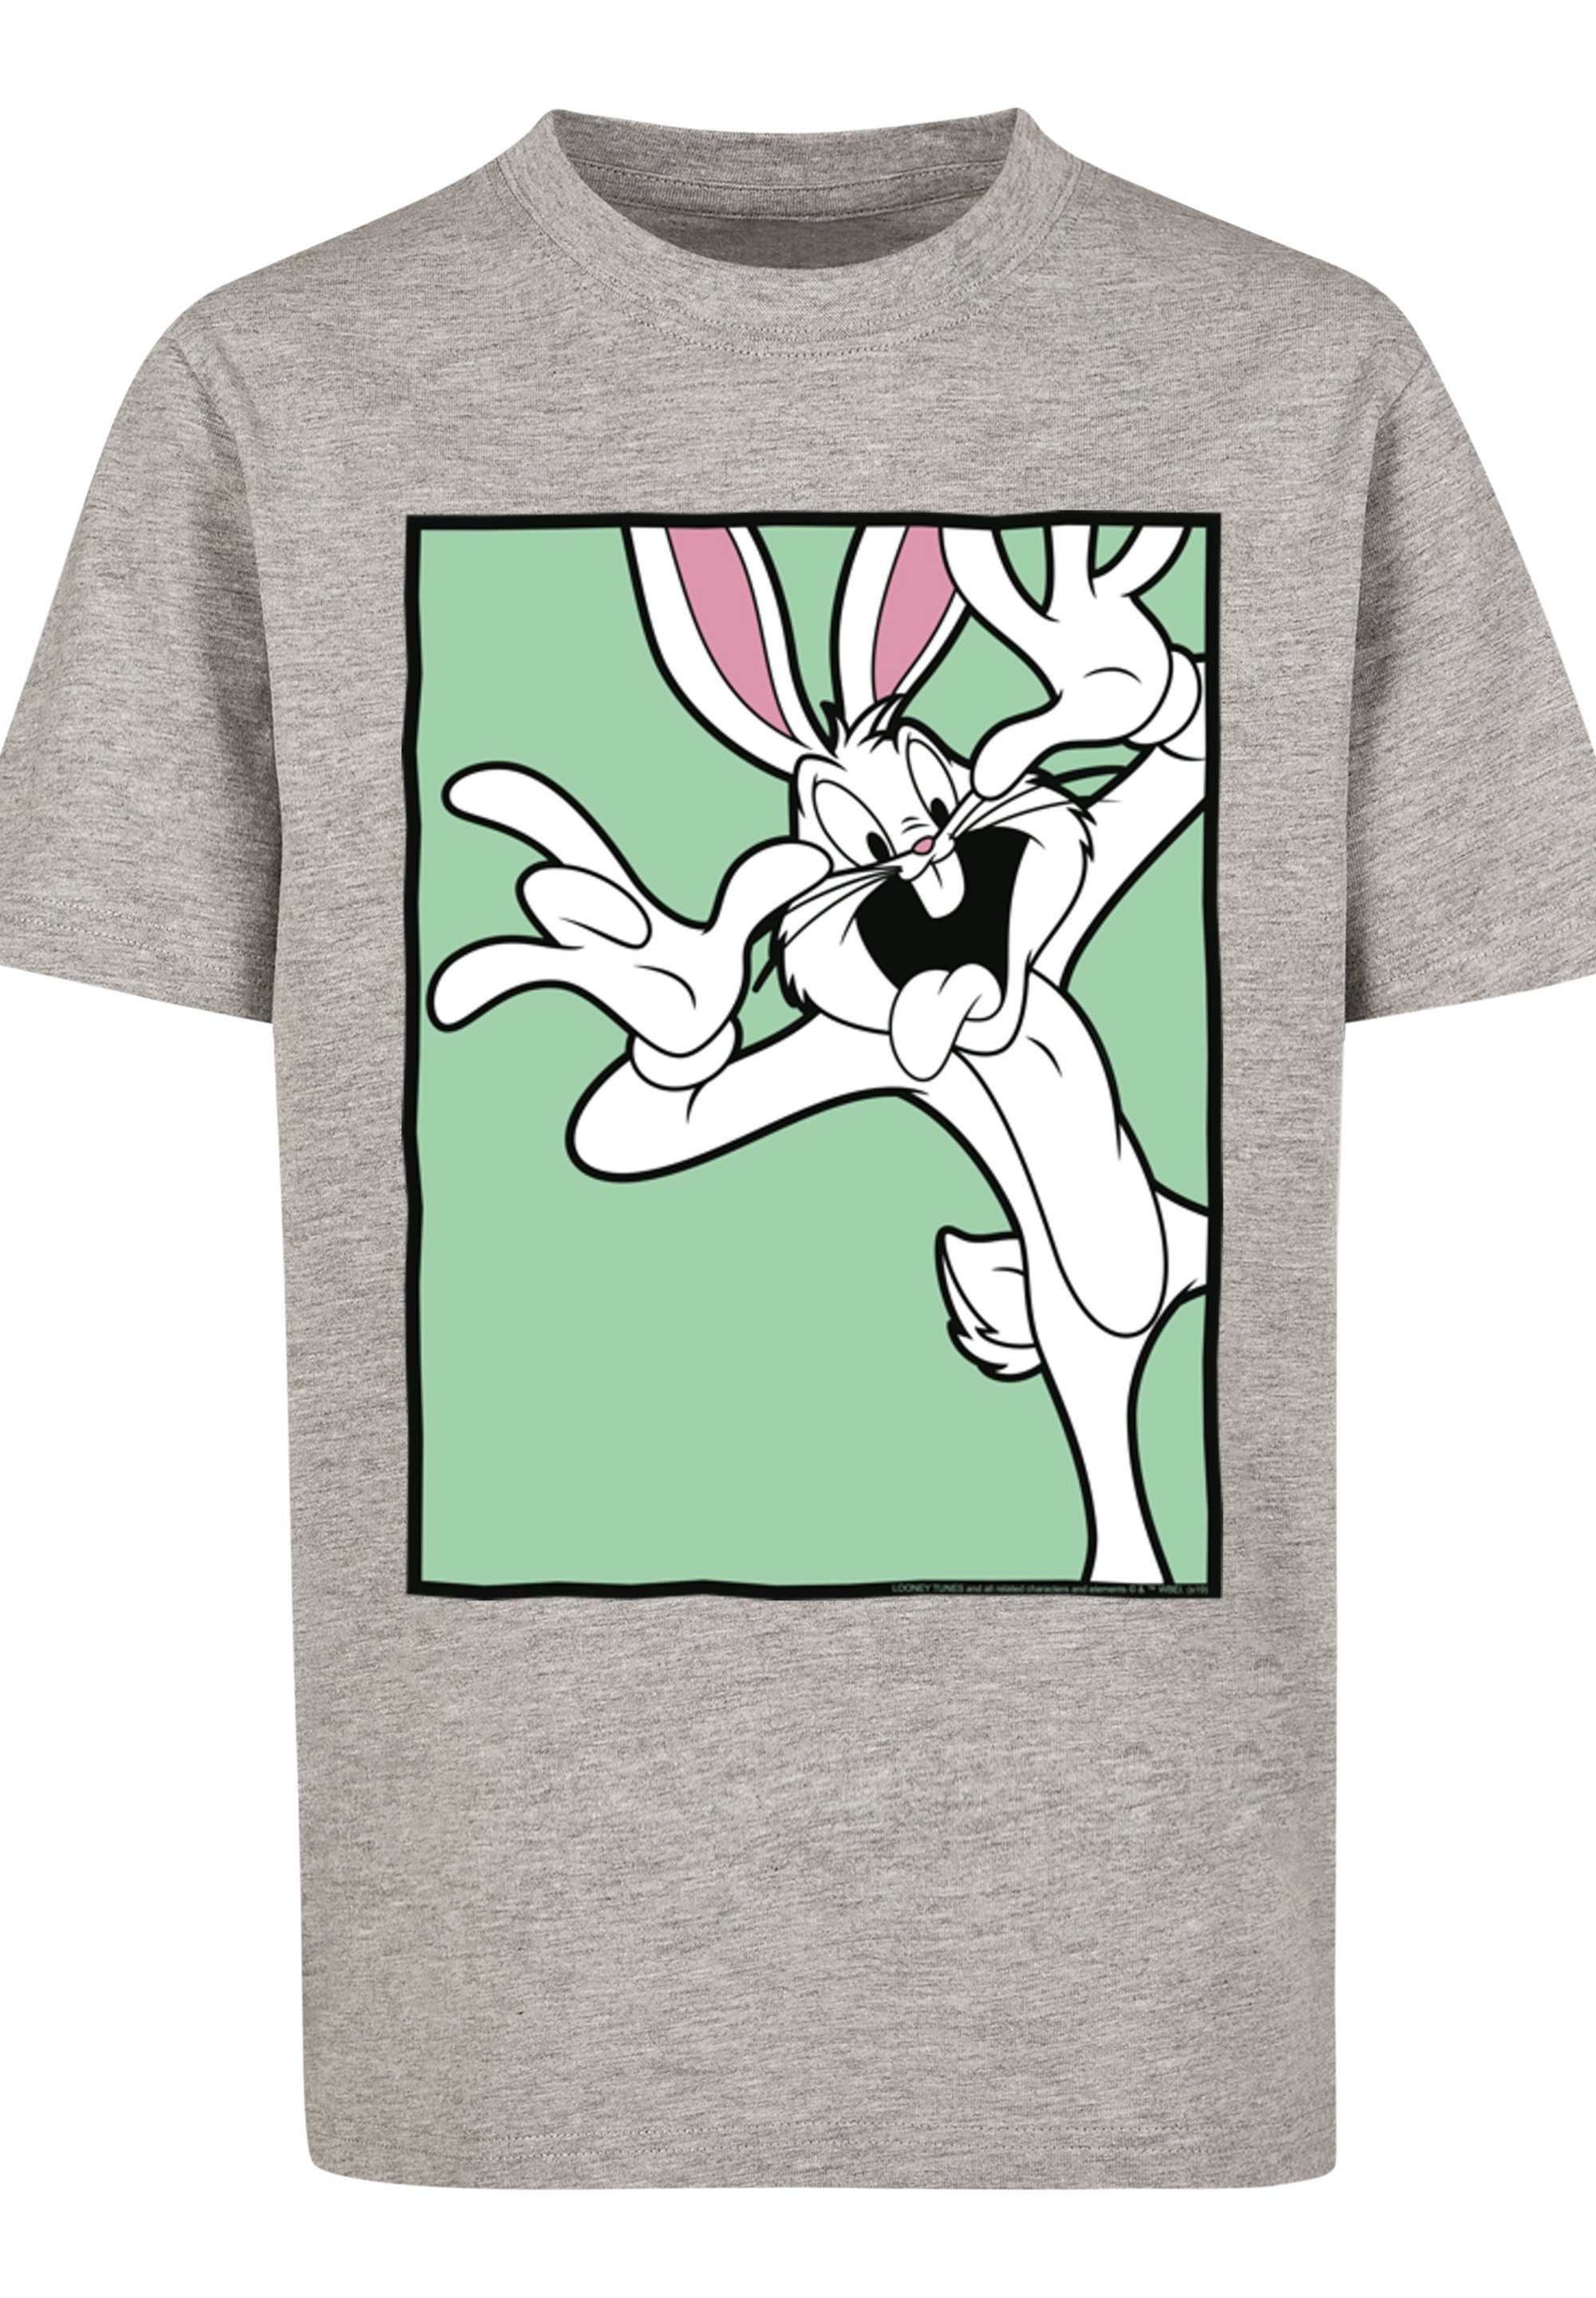 Tunes Bunny Looney Funny Bugs T-Shirt F4NT4STIC heather grey Face Print